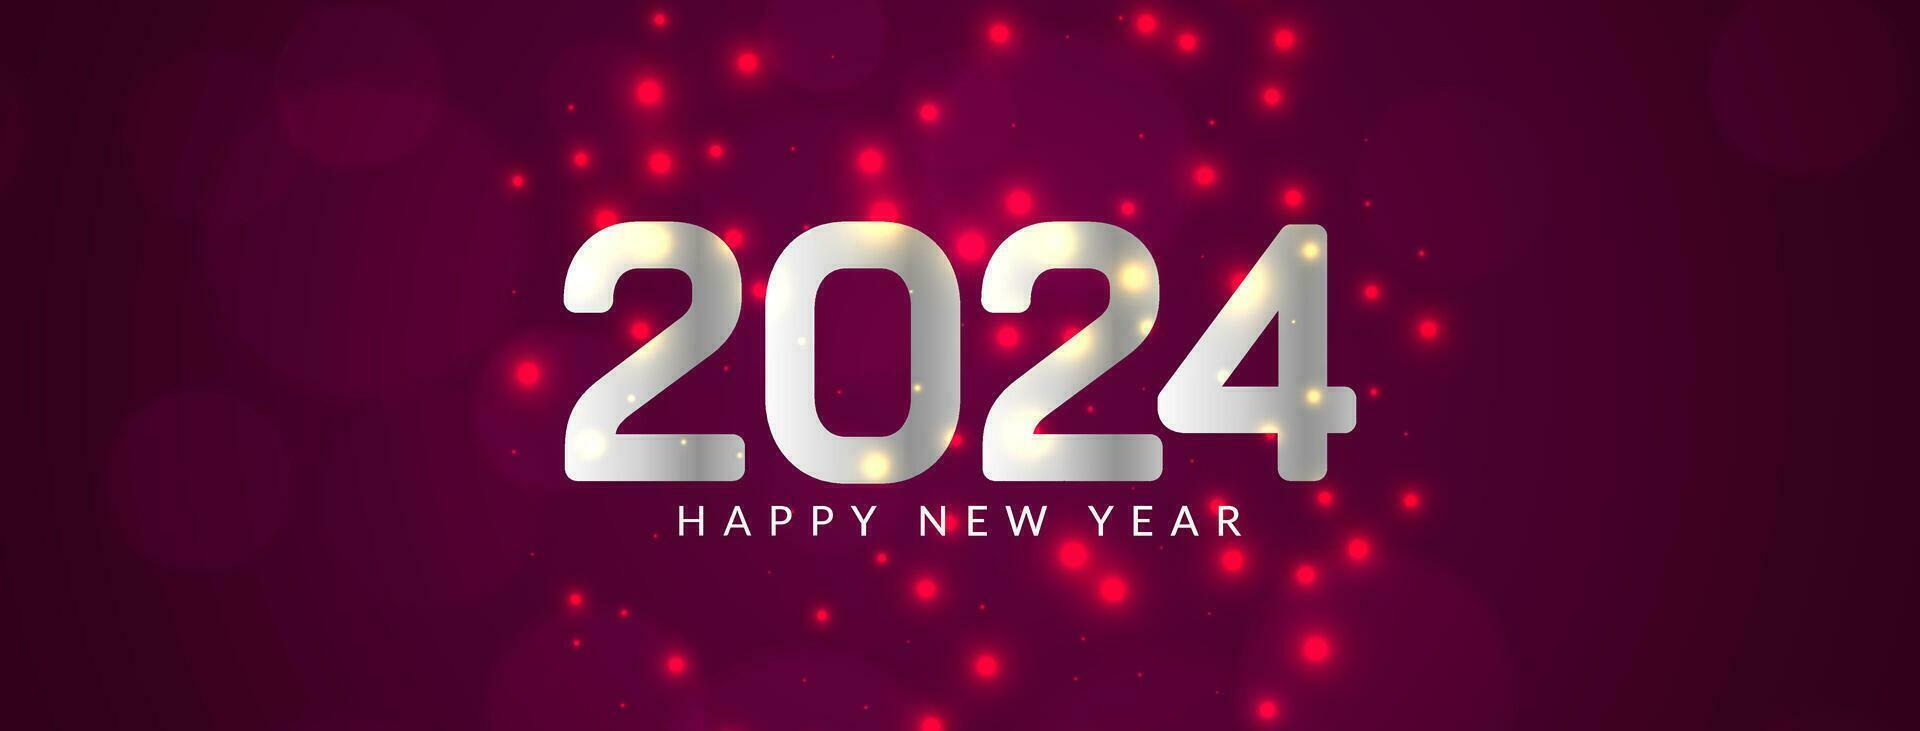 Happy new year 2024 beautiful glossy banner design vector